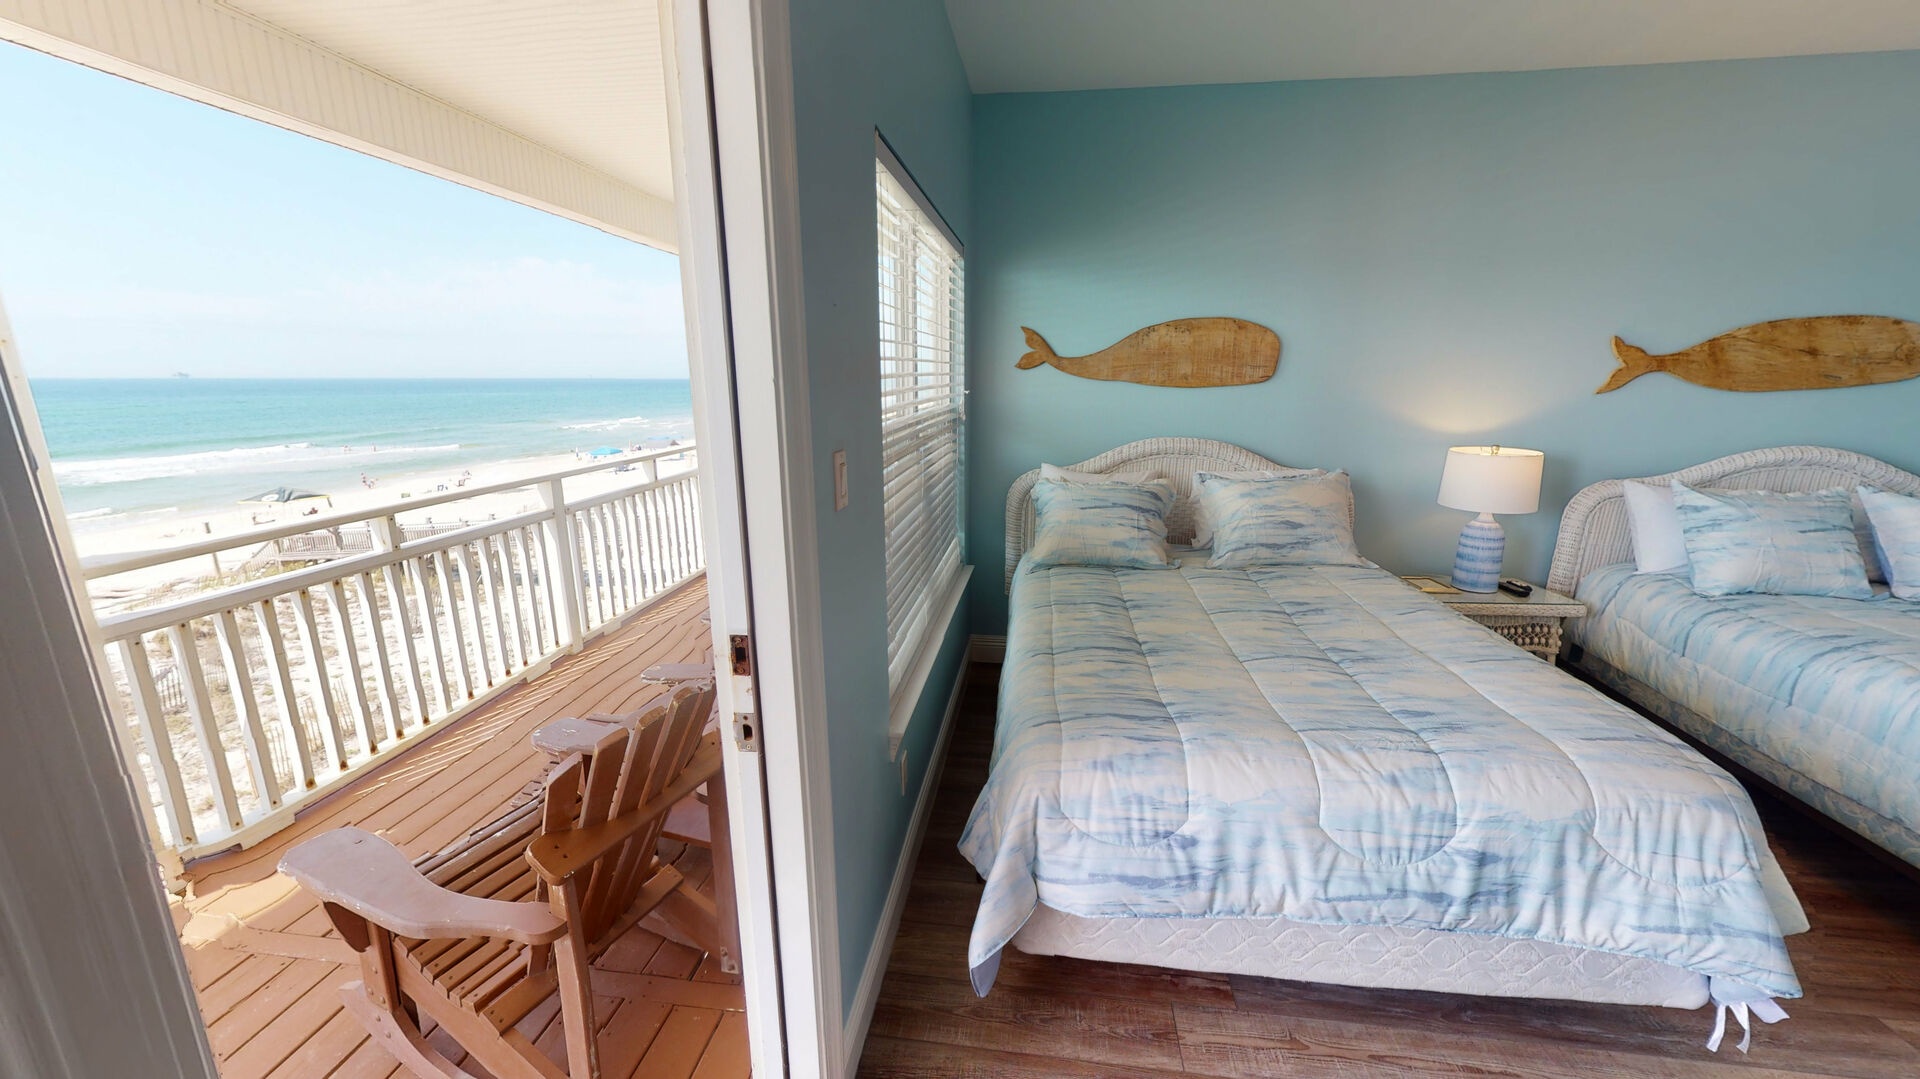 Bedroom 6 features 2 queen beds- sleeps 4, TV with cable, access to the balcony with beach views and an attached, private bathroom